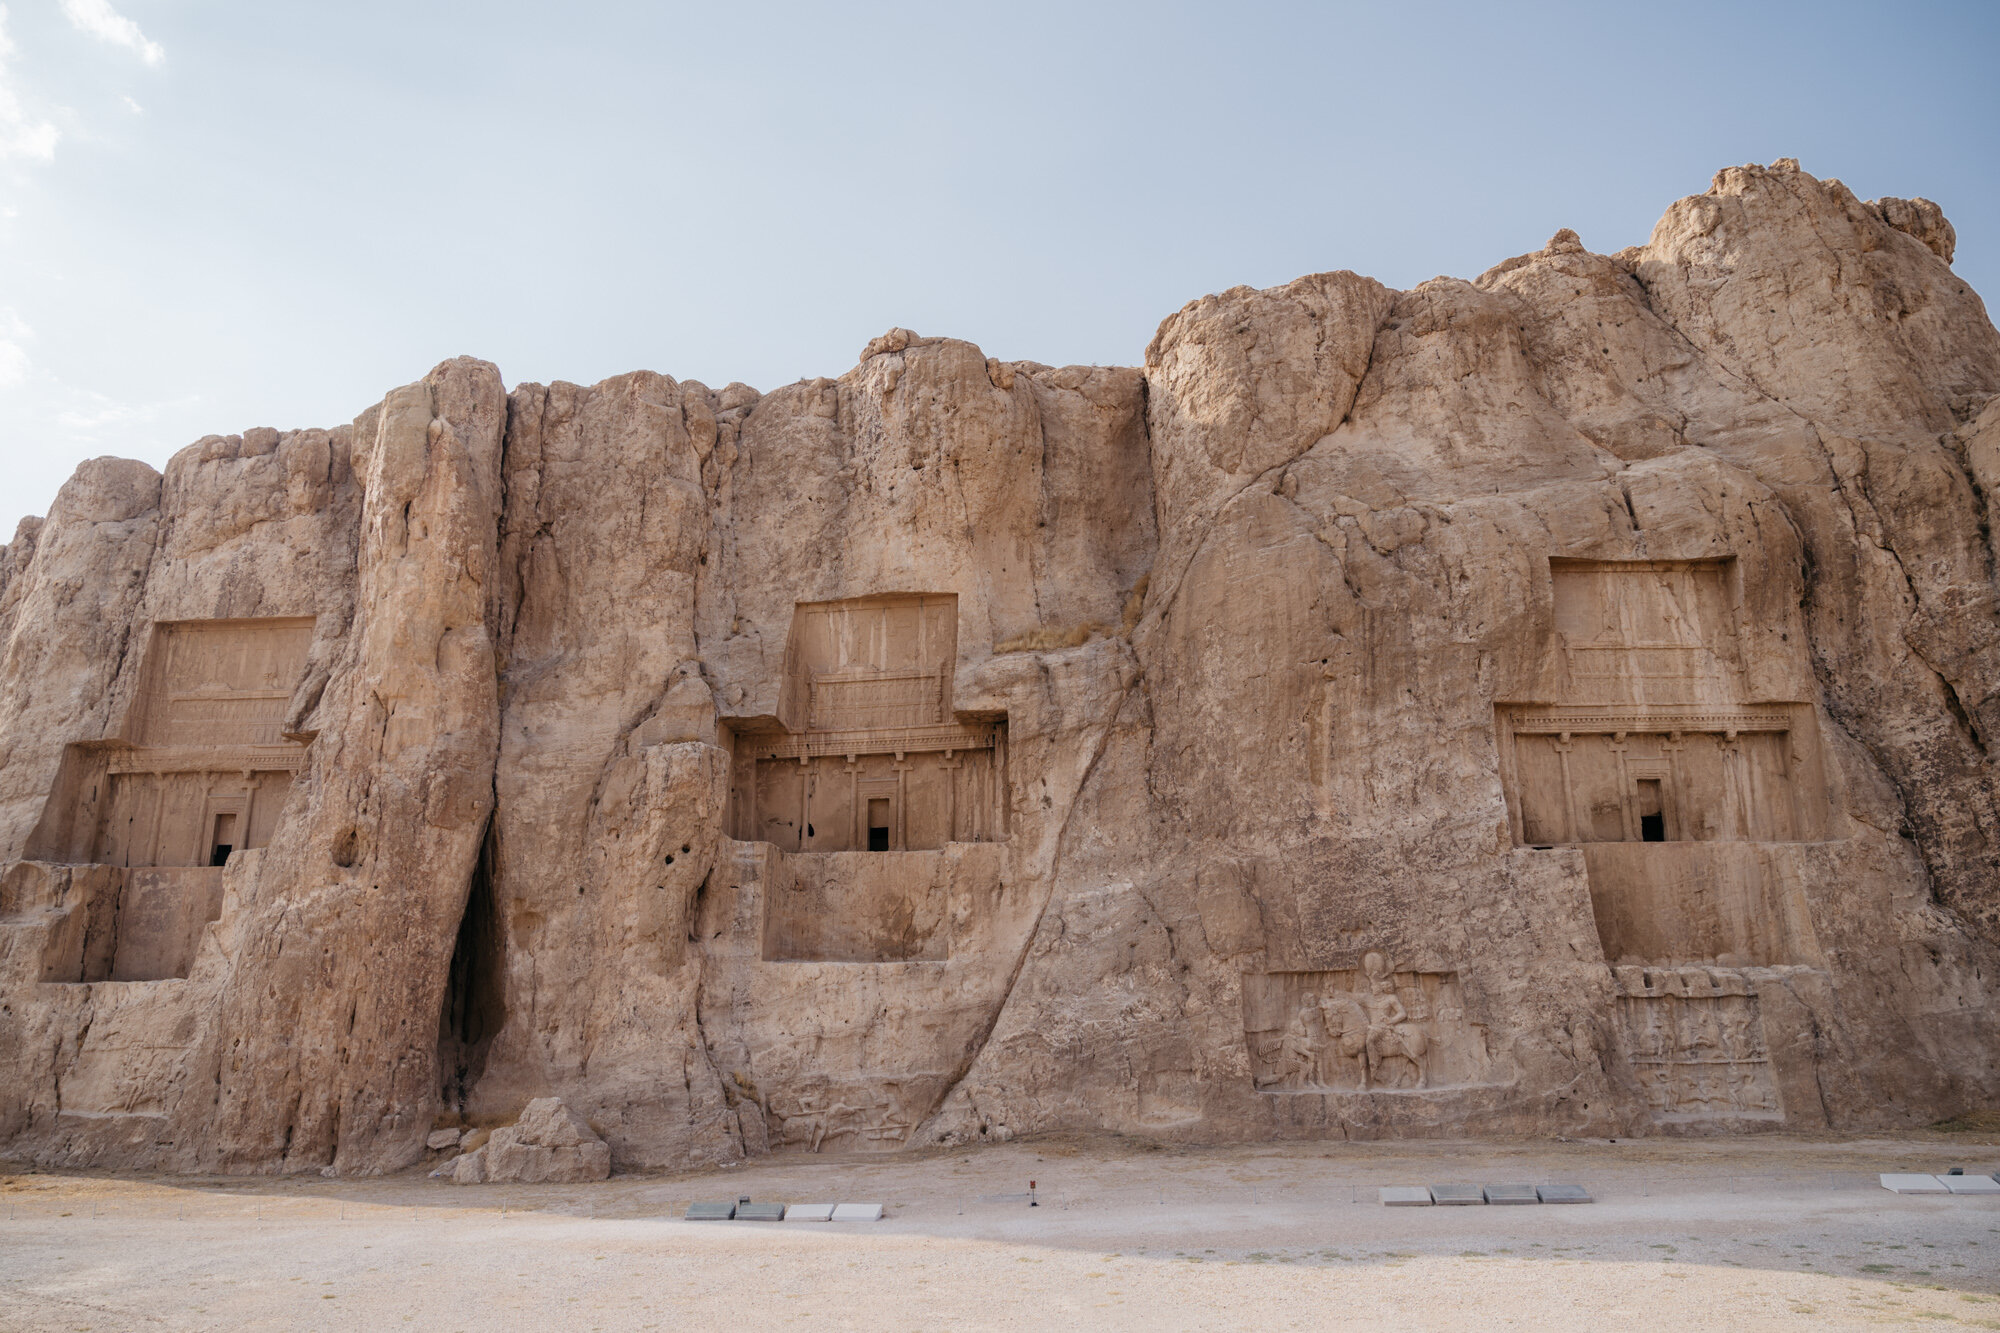  Achaemenid and Sassanid tombs at the the Naqsh-e Rostam necropolis 